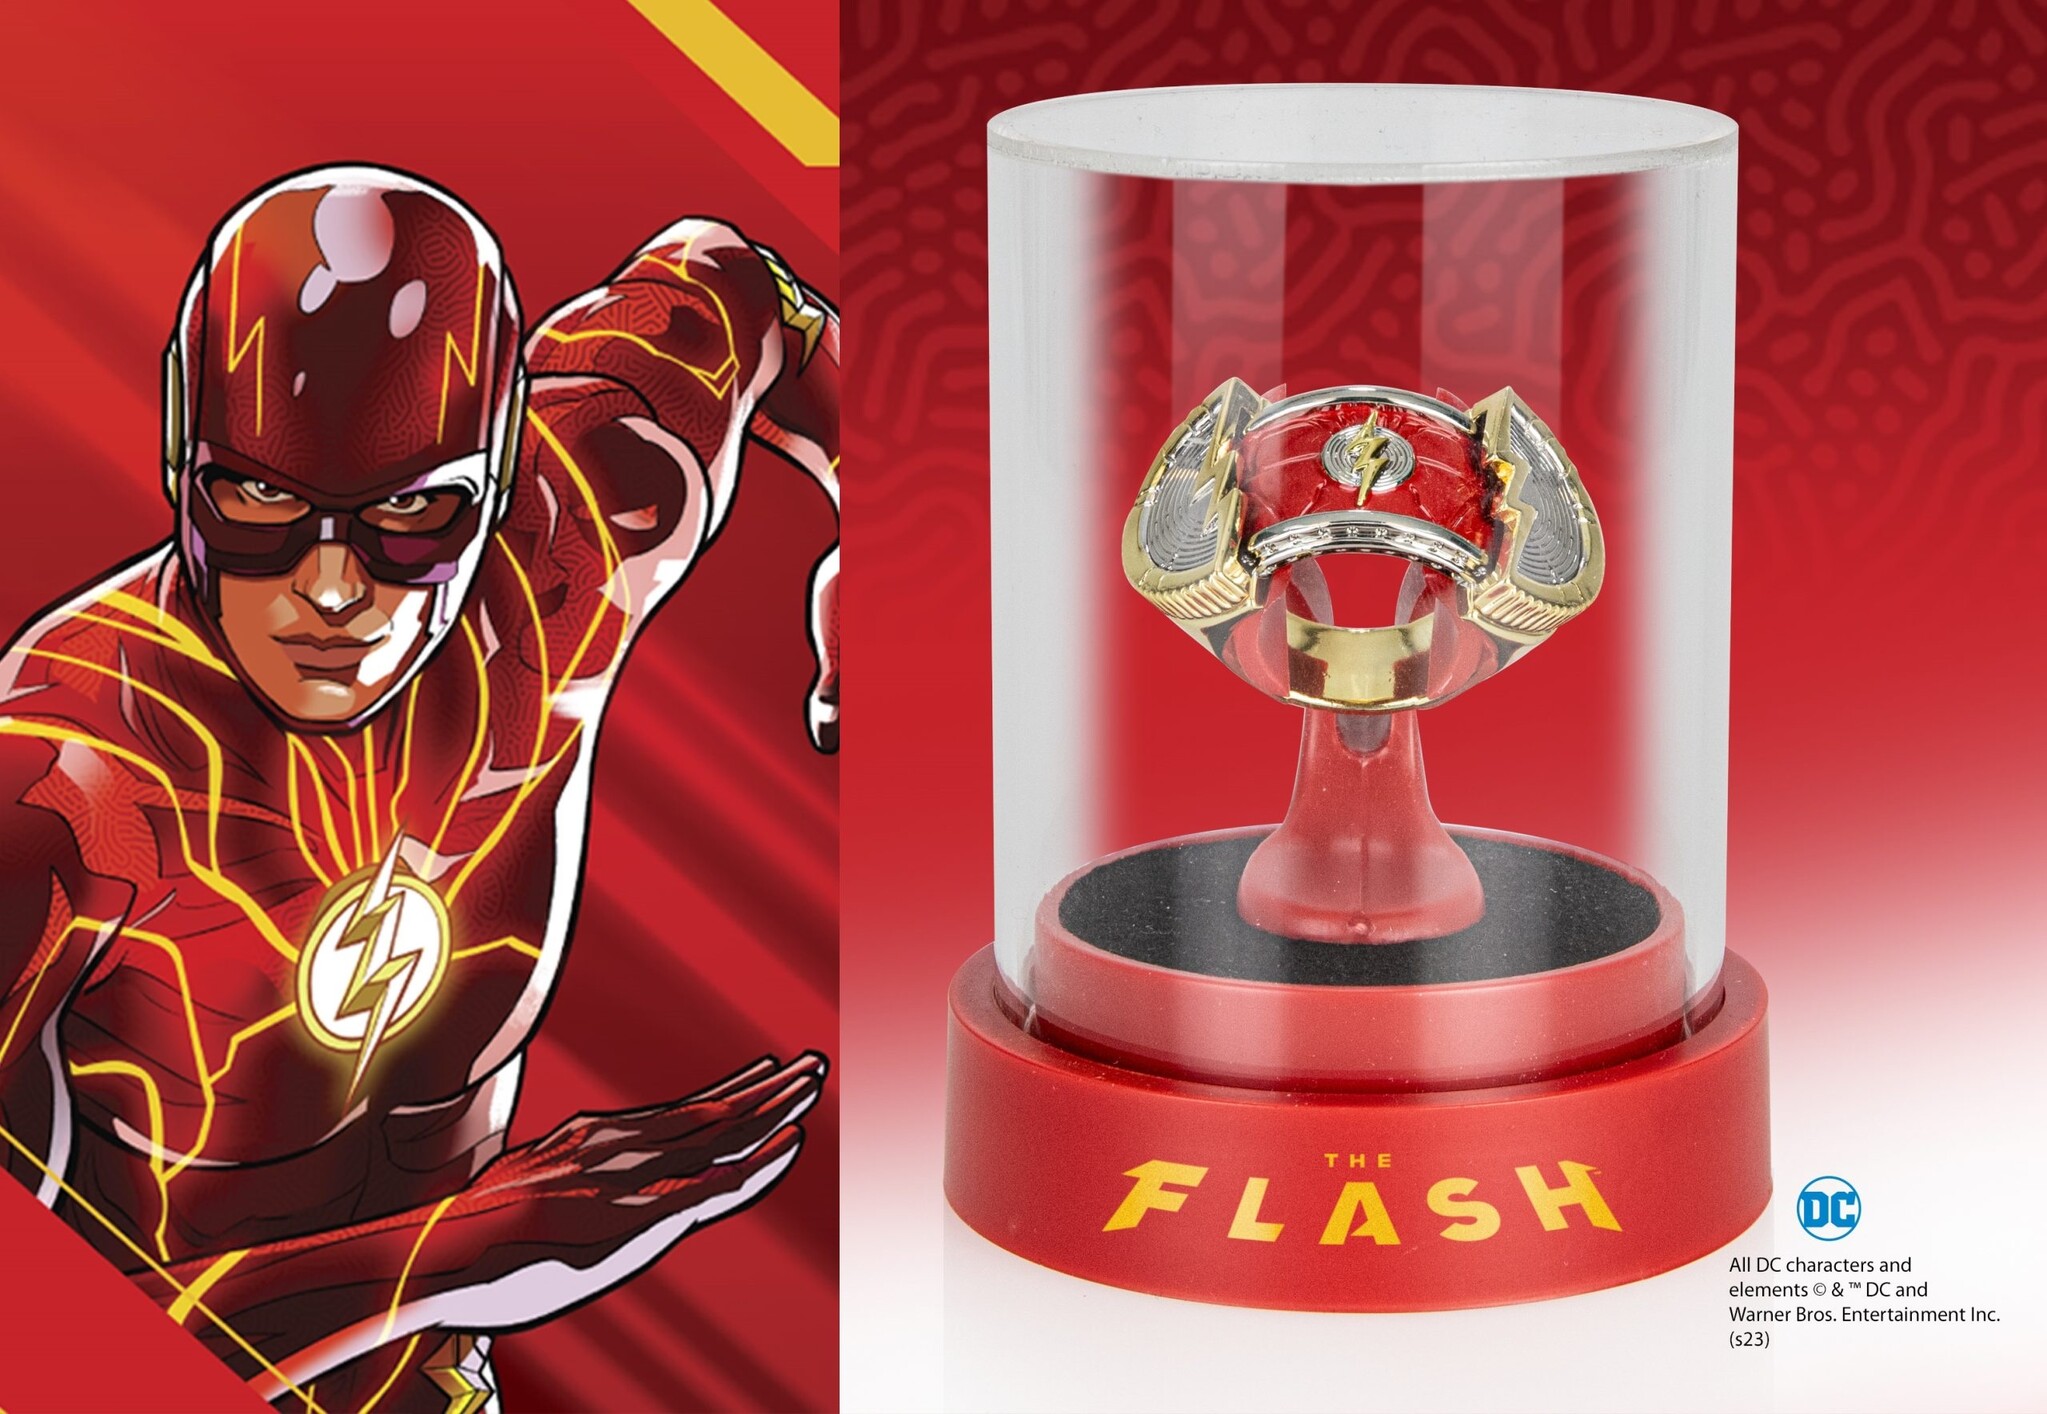 DC The Flash Movie Costume Ring Brass Replica With Slide-Open Function |  Size 11 - Walmart.com